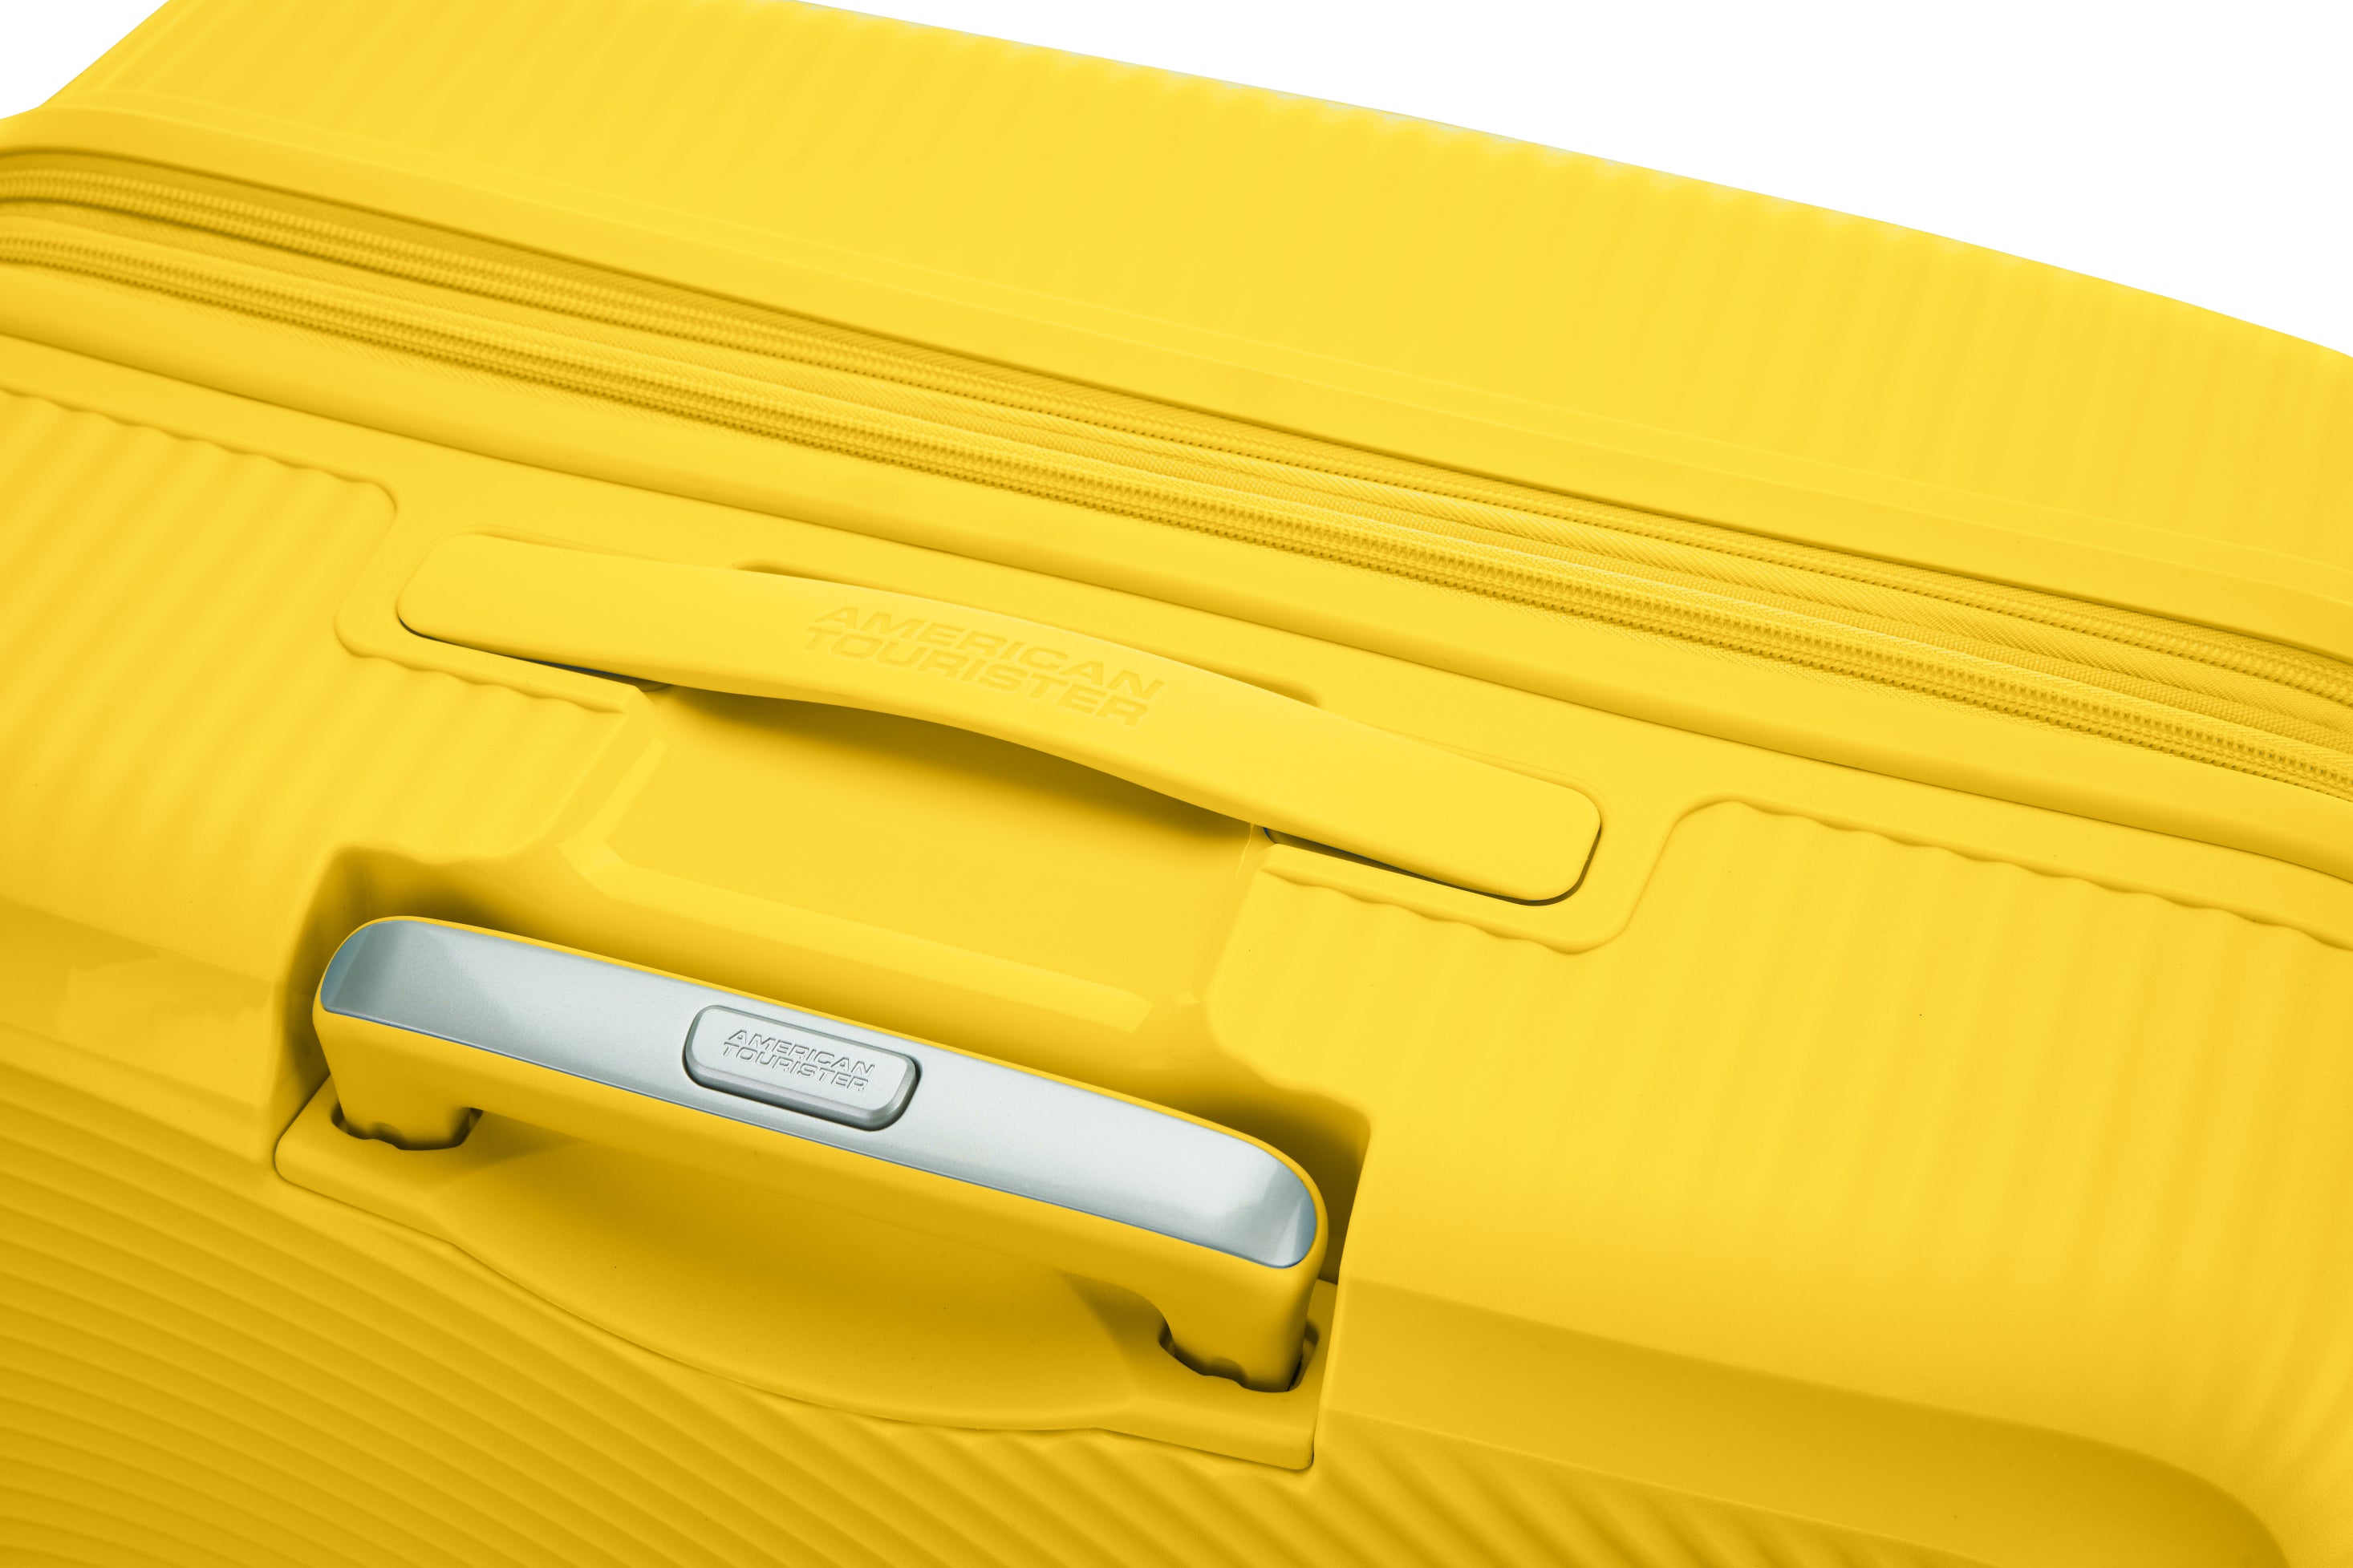 American Tourister - Curio 2.0 80cm Large Suitcase - Golden Yellow-6